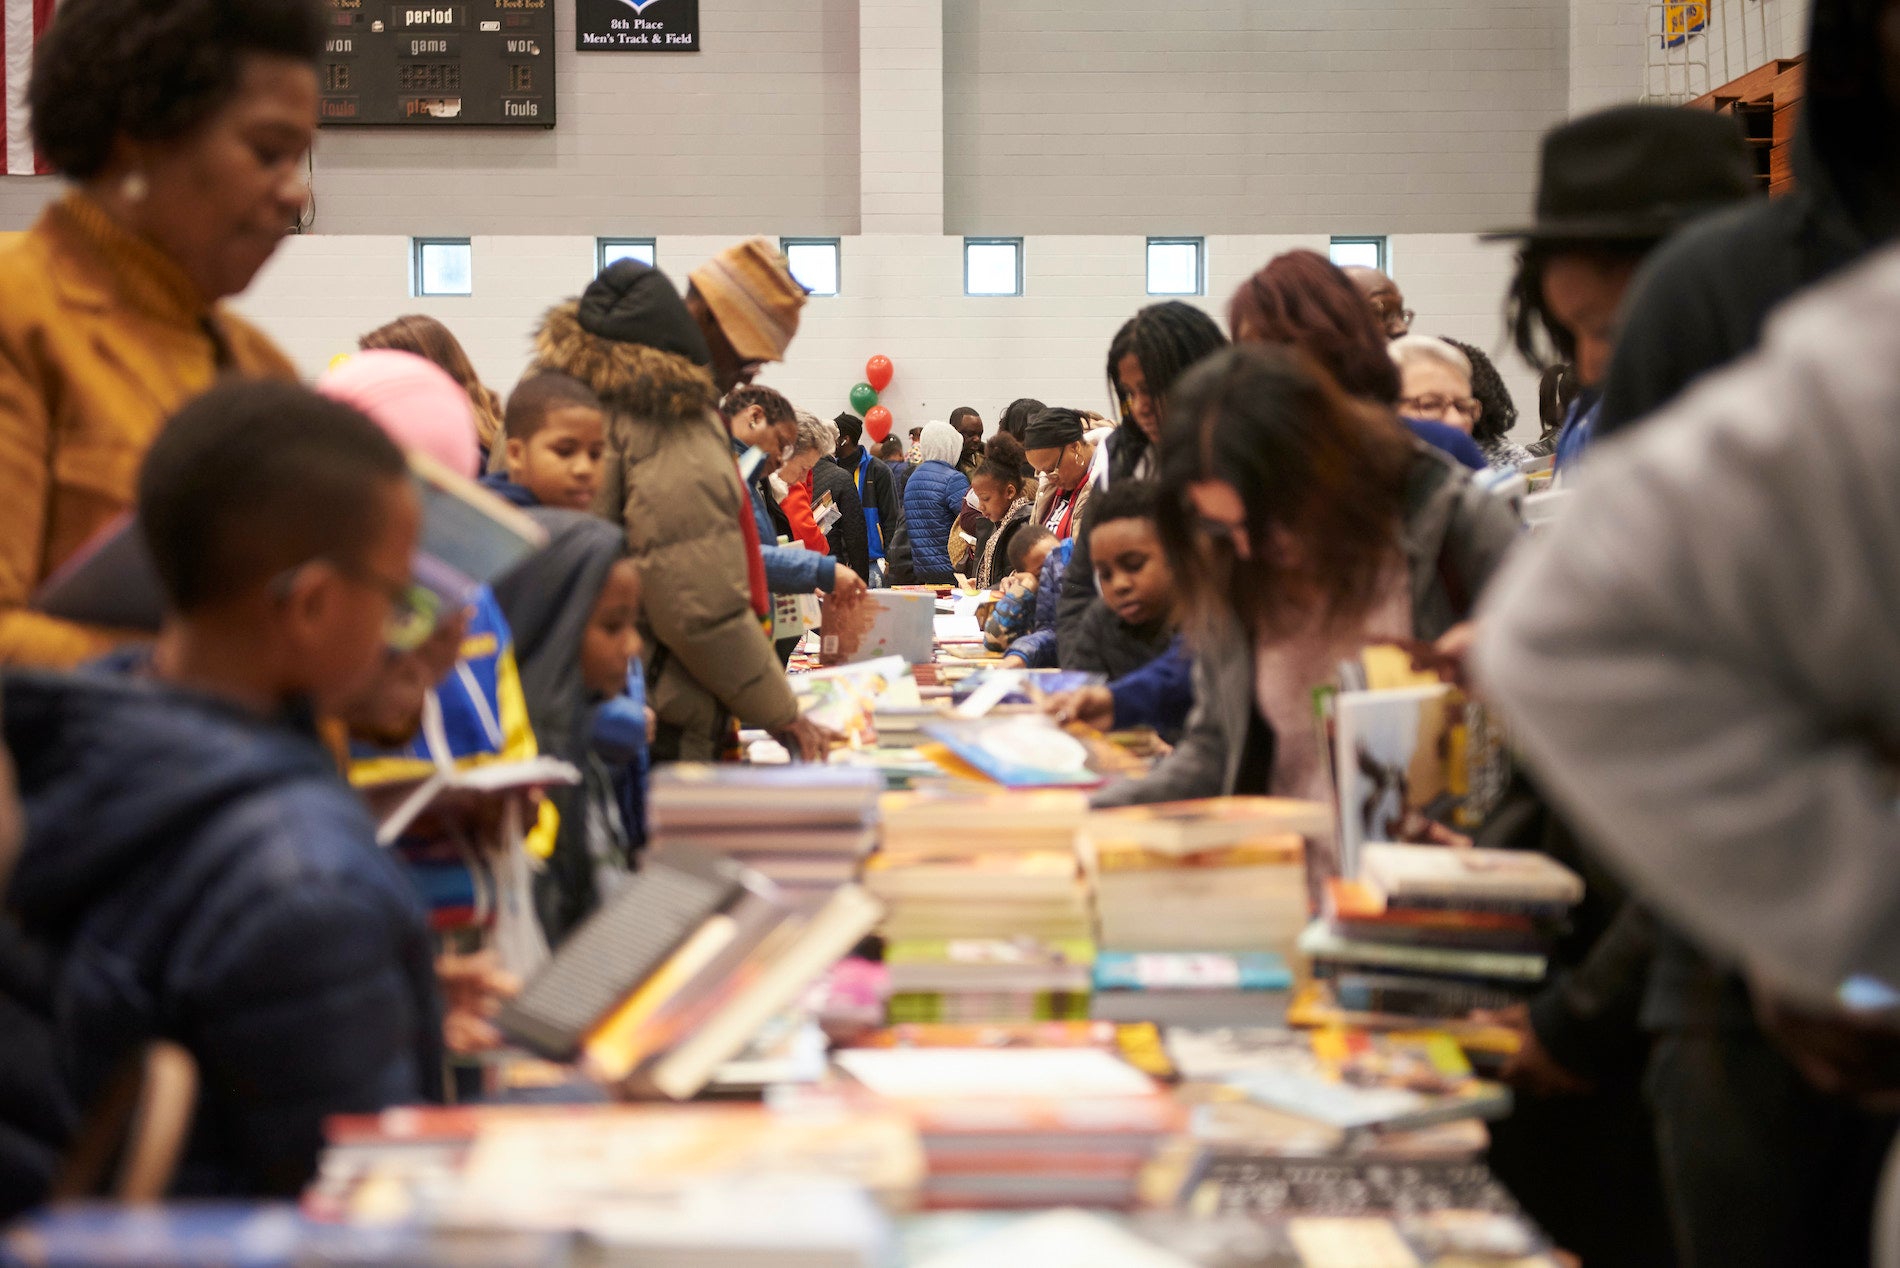 The 28th annual African American Children's Book Fair at the Community College of Philadelphia was held pre-pandemic on Feb. 8, 2020